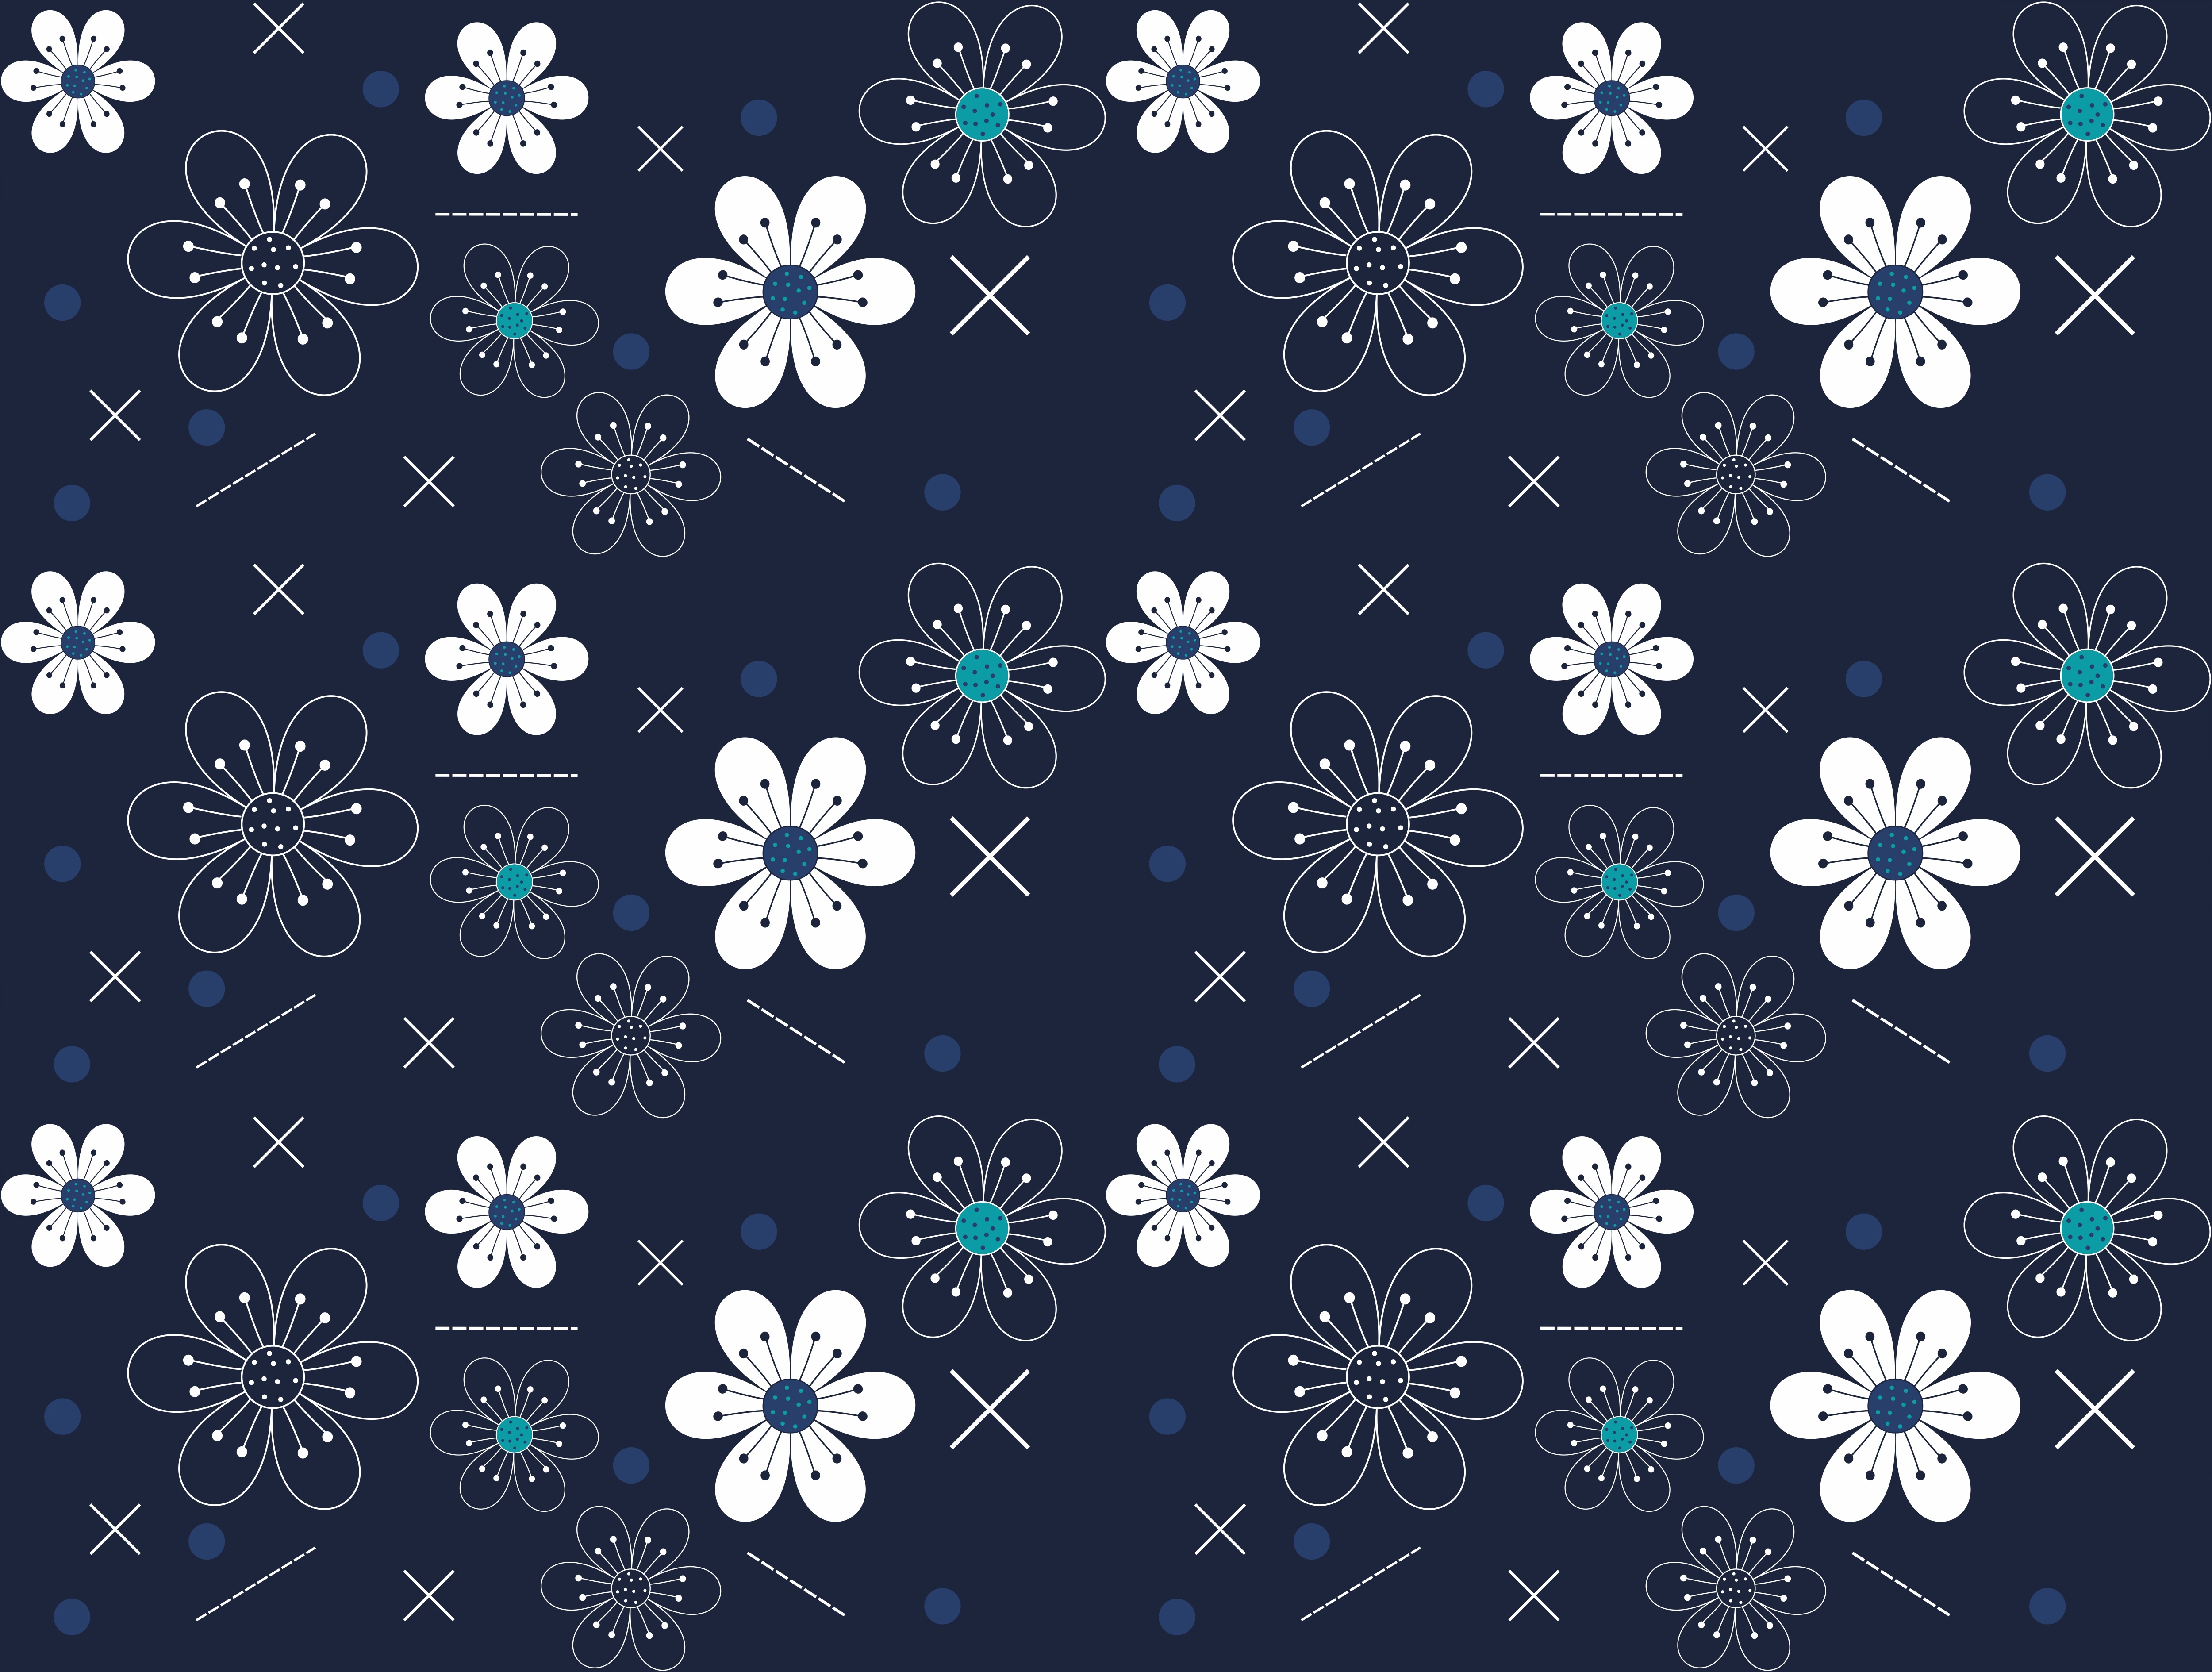 Mobile wallpaper patterns, form, flowers, forms, vector